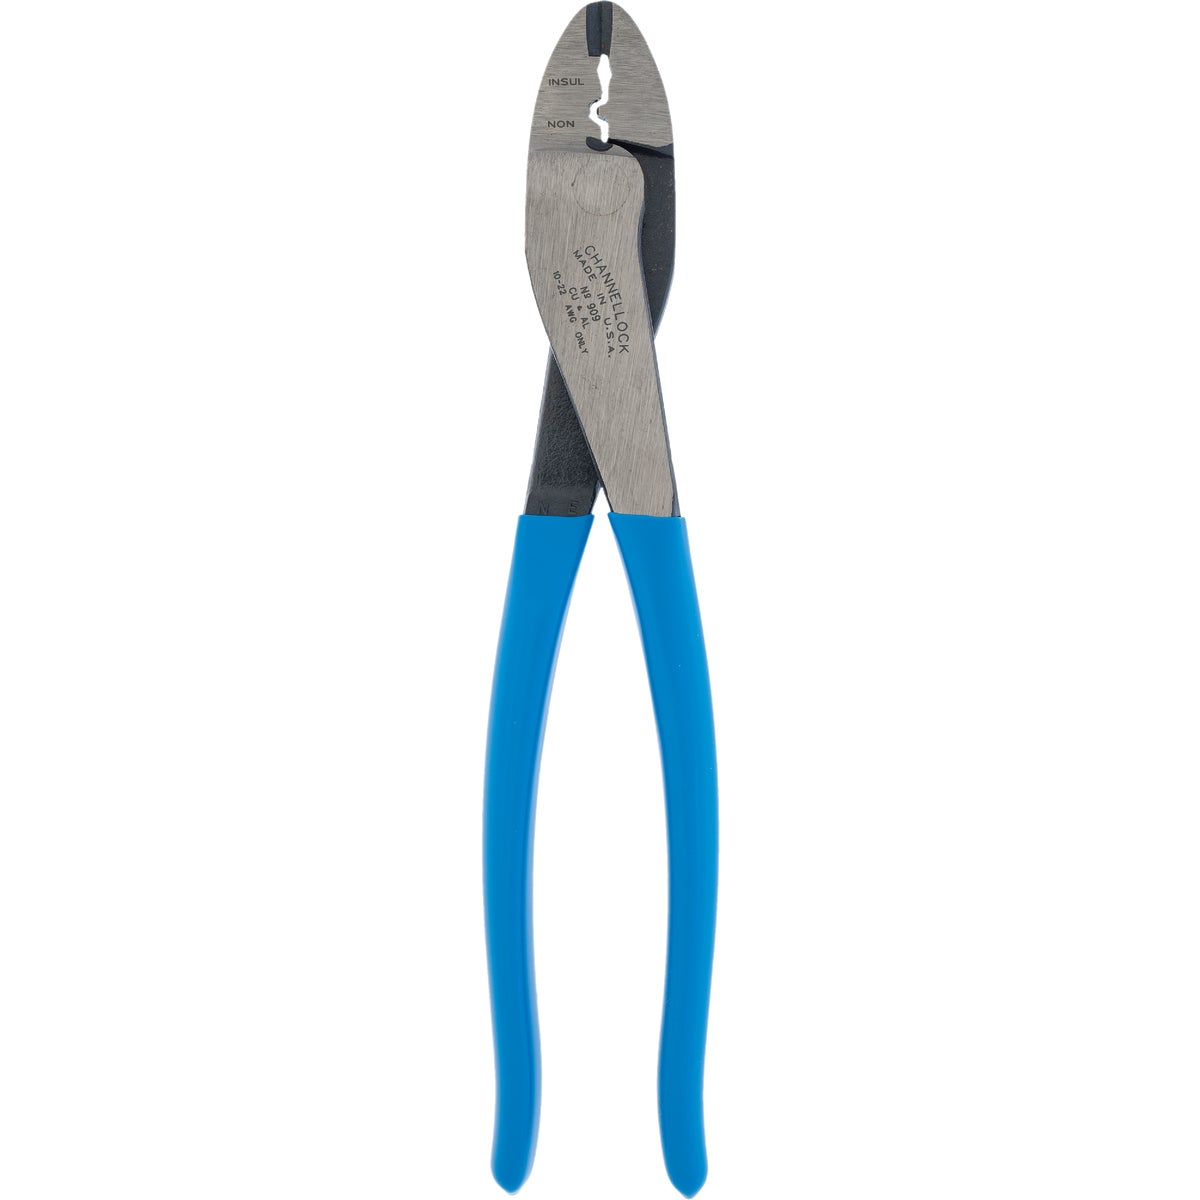 Channellock 9-1/2 In. Polished High-Carbon Drop-Forged Steel Crimp & Cut Plier